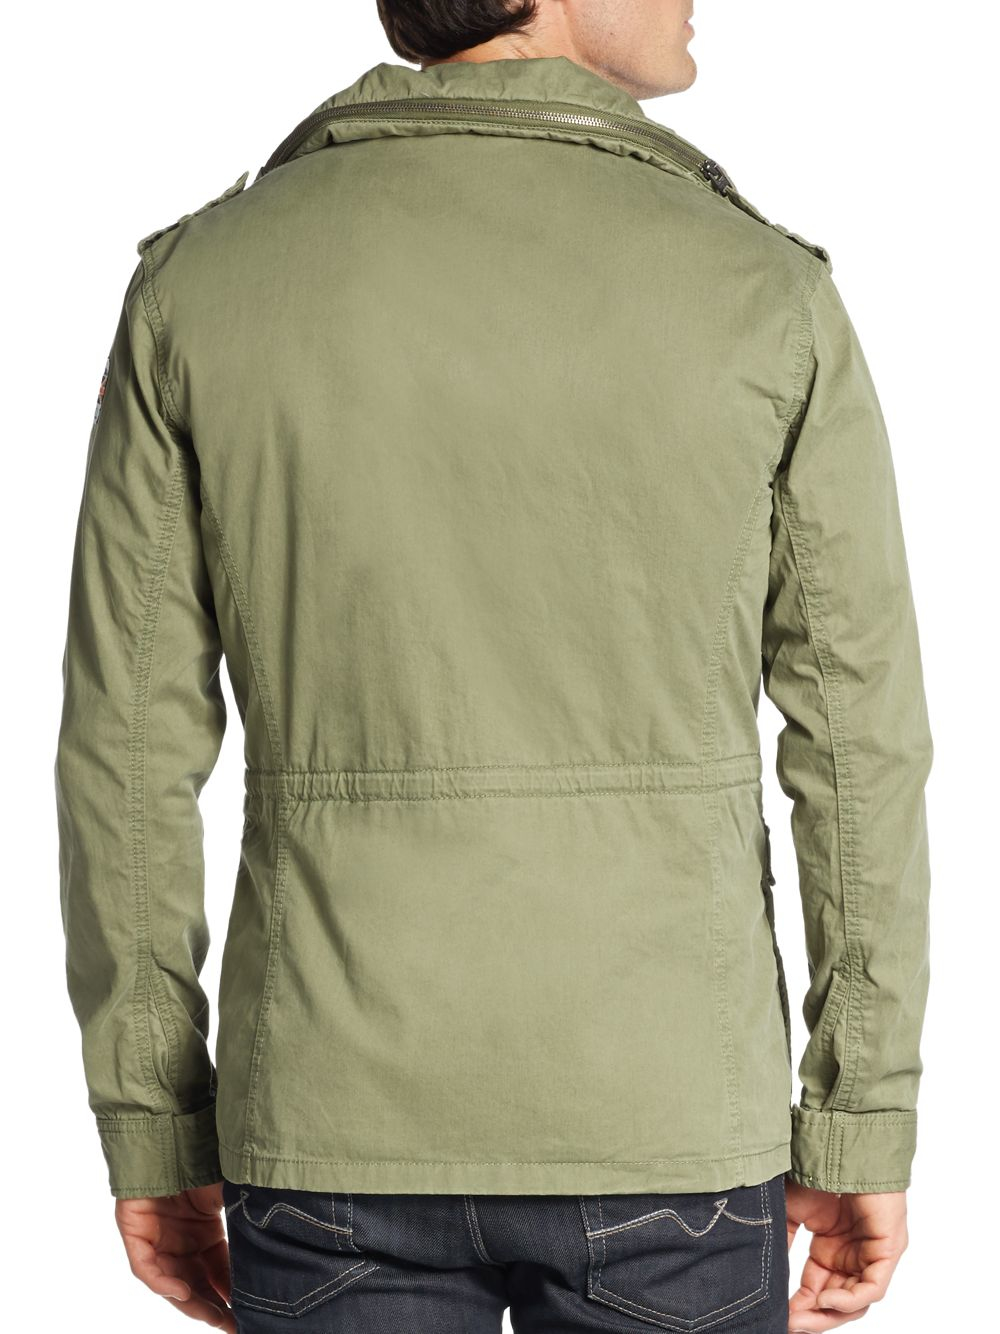 Superdry Military Flight Bomber Jacket - Men's Products